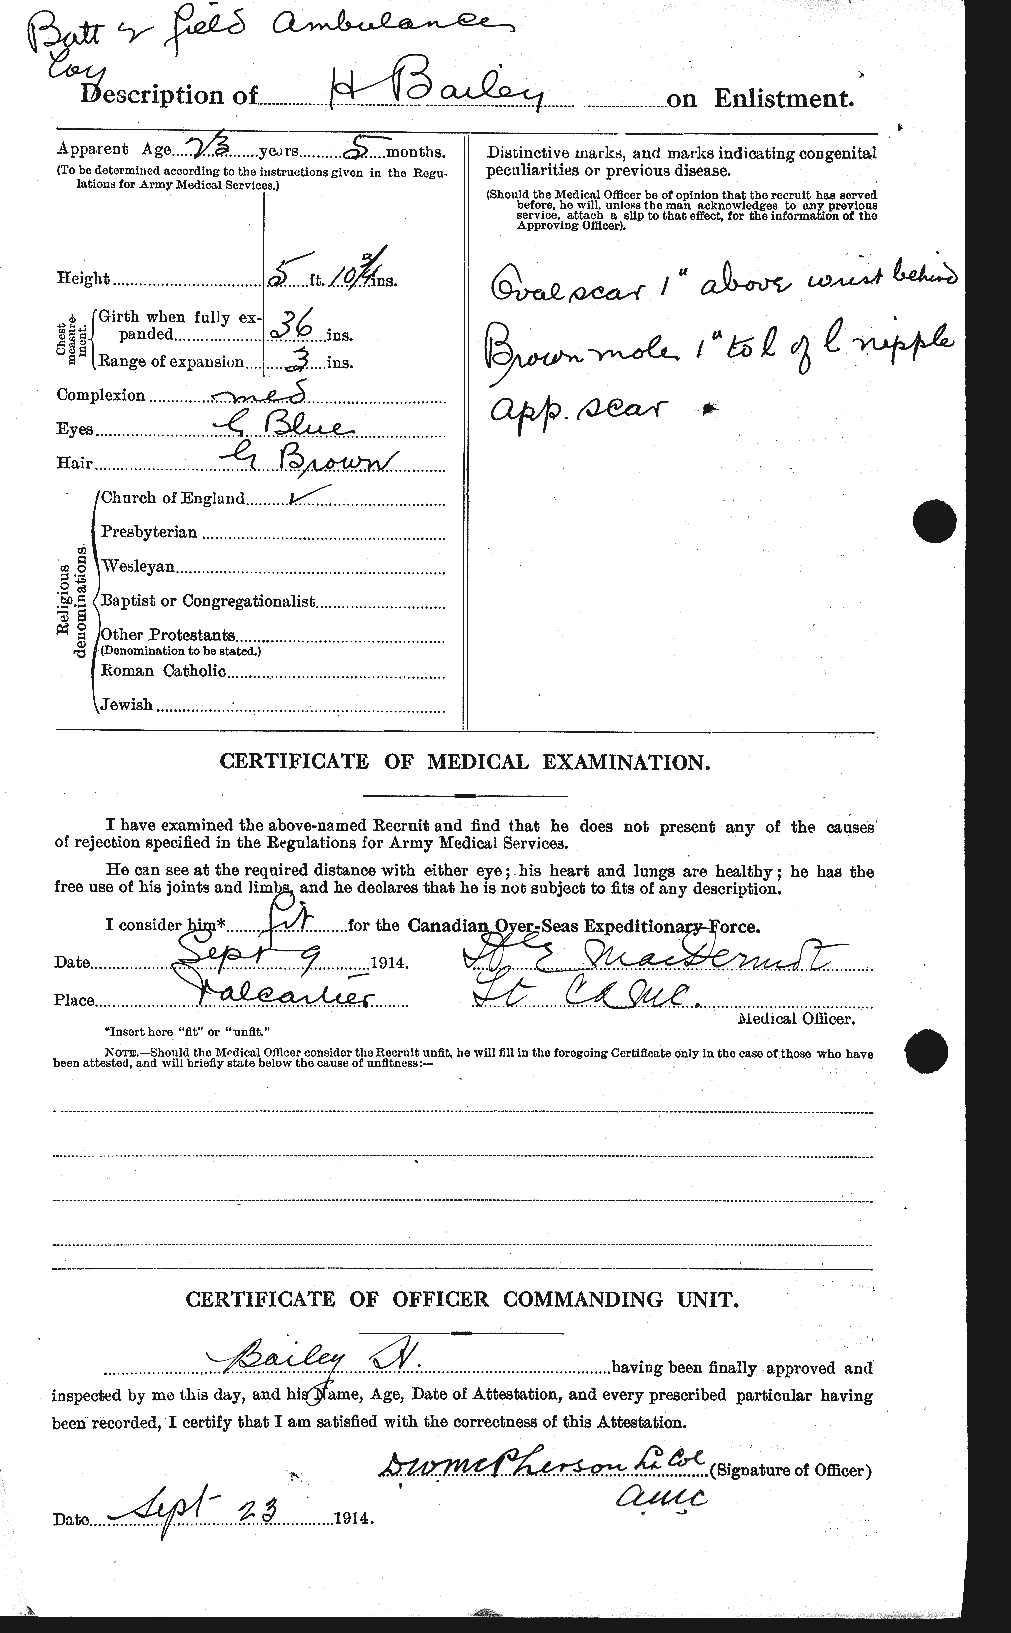 Personnel Records of the First World War - CEF 218909b